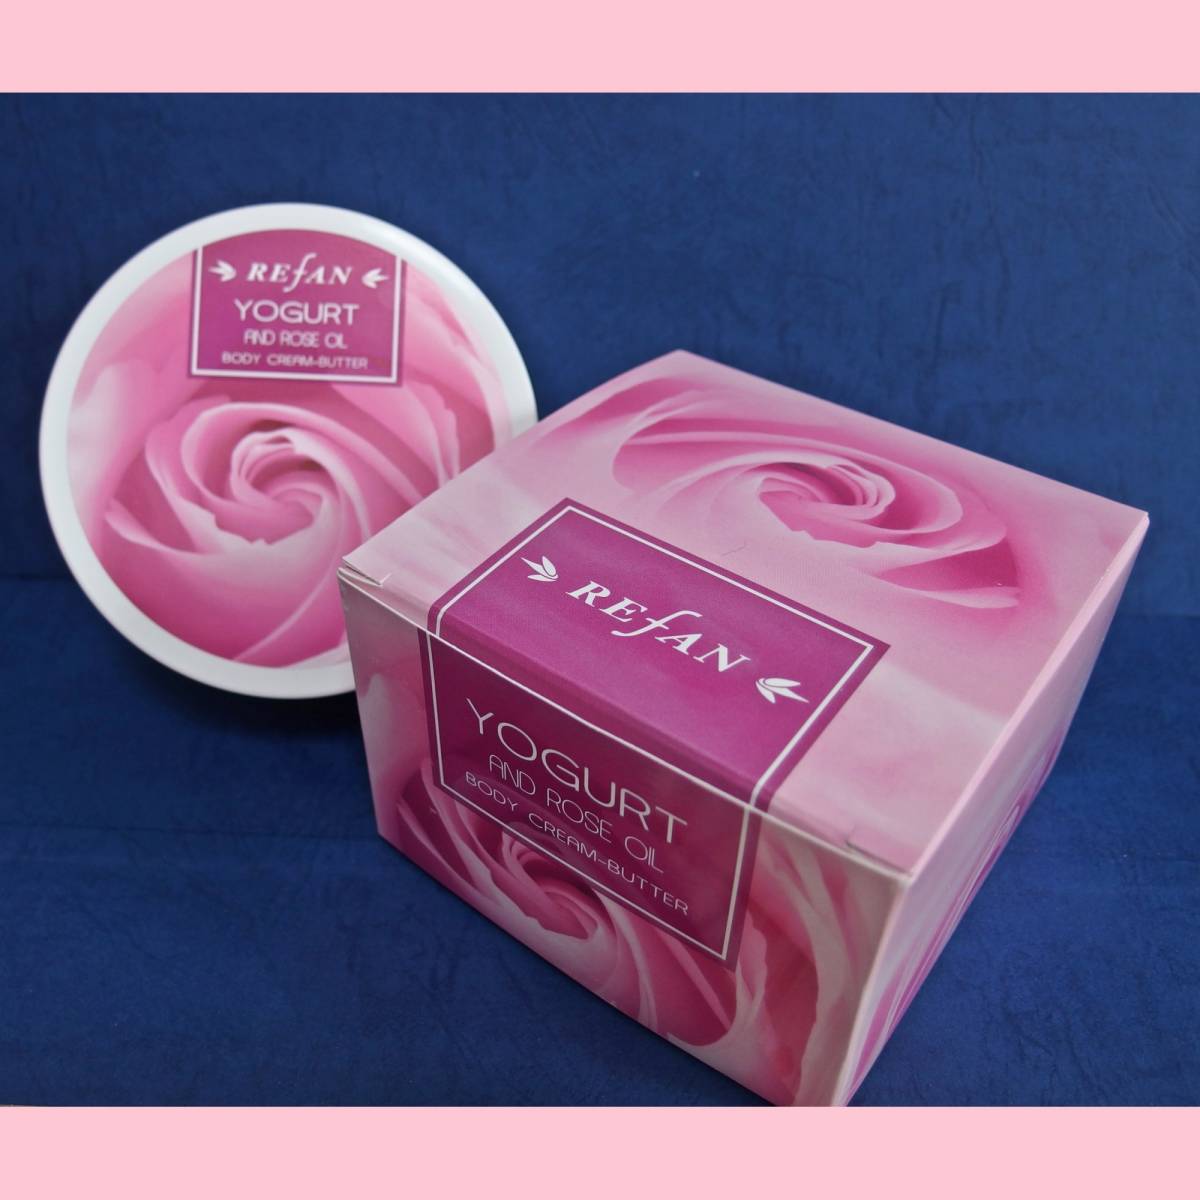 ** 2 piece set . profit! BVLGARY aREFAN company manufactured body cream butter ( yoghurt & rose oil ) **